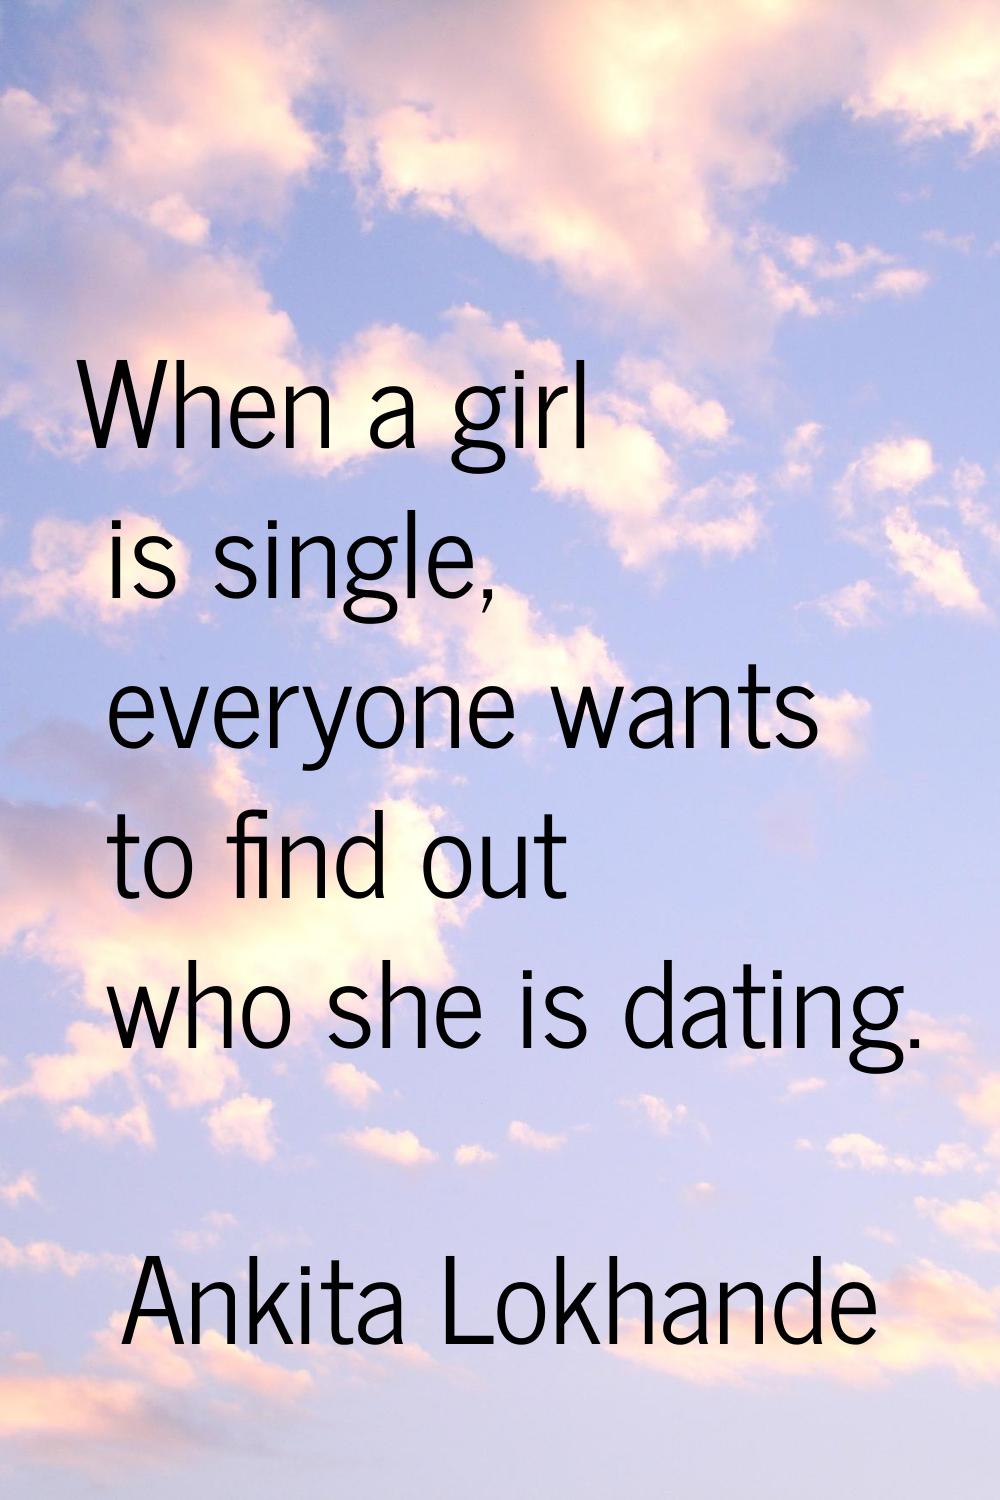 When a girl is single, everyone wants to find out who she is dating.